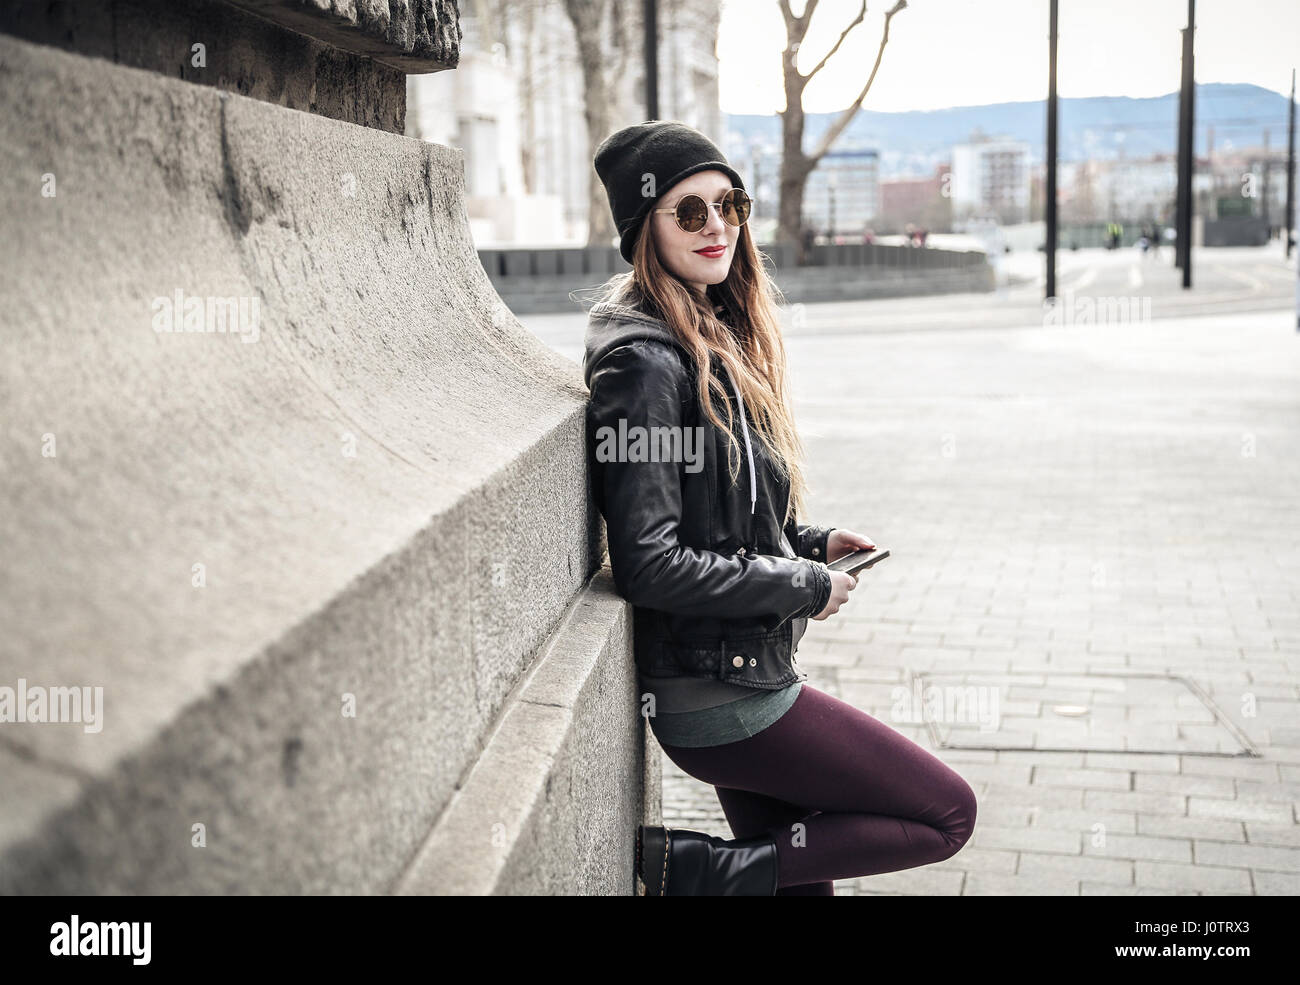 Young woman posing in the city Stock Photo